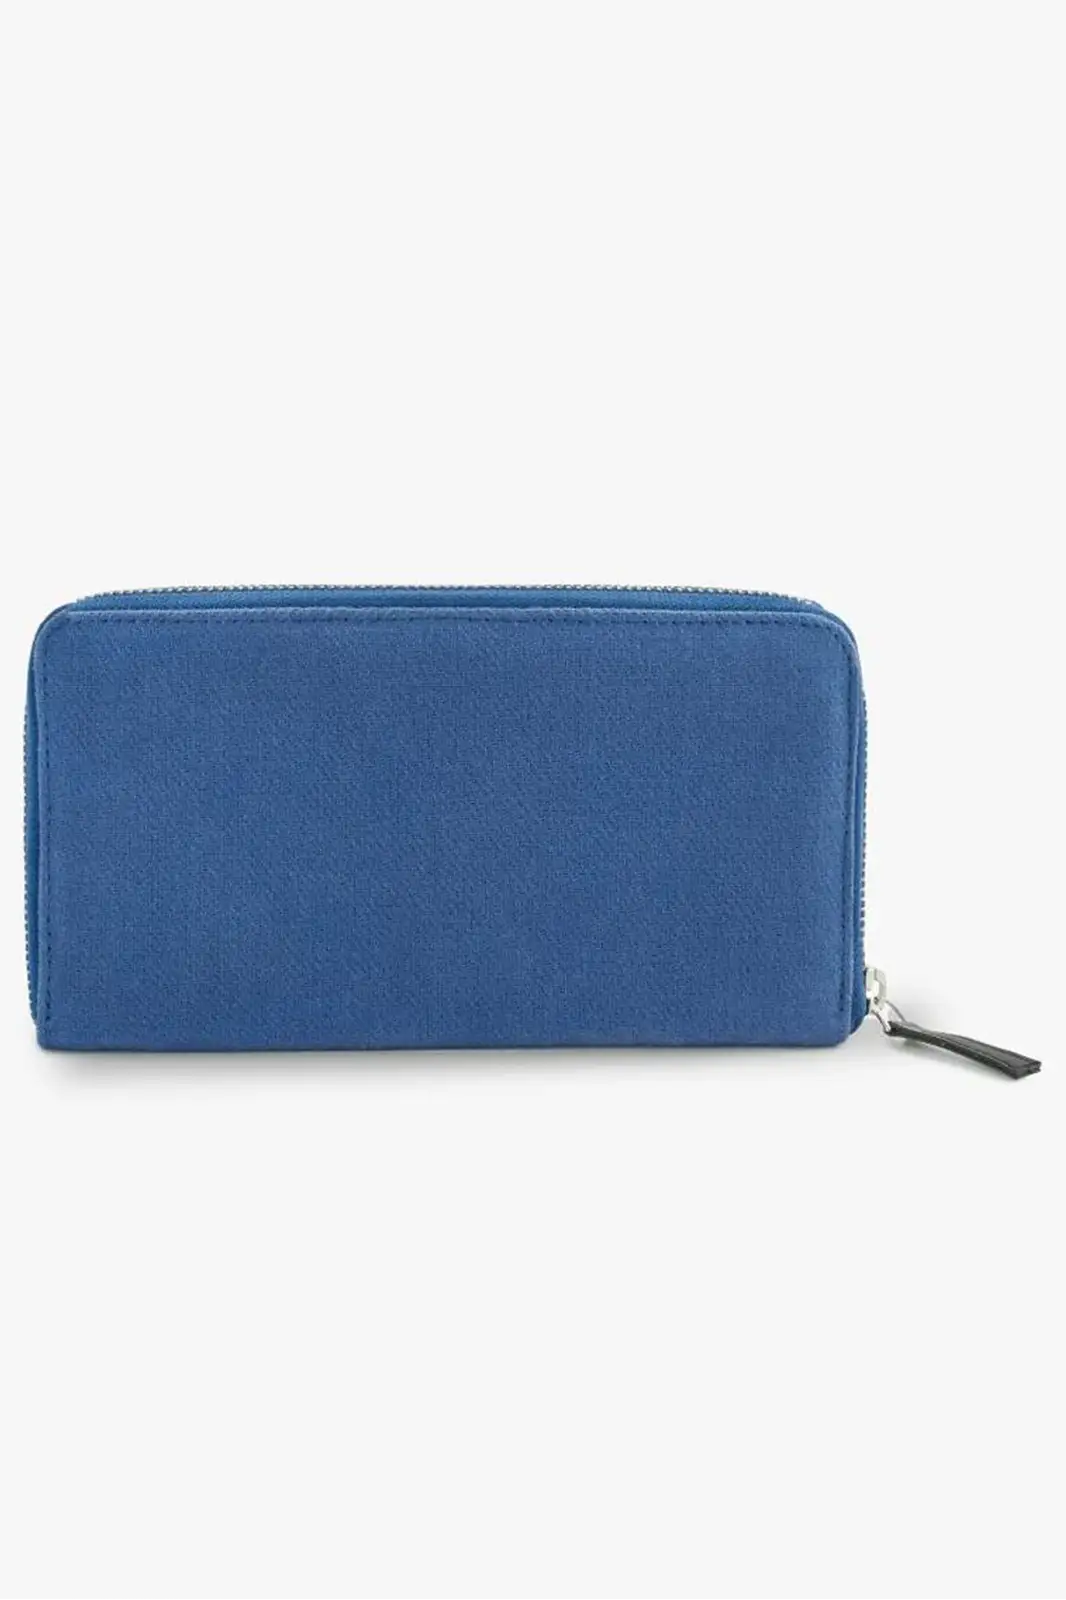 wallet blue lagoon nautical dreams, wallet for woman, wallet ladies, small women wallet, small wallet ladies, purse wallet, mini purse wallet, non leather wallets, high design wallet, non leather wallets for women, branded wallets for women, luxury wallets, trendy wallets for ladies, ecoright